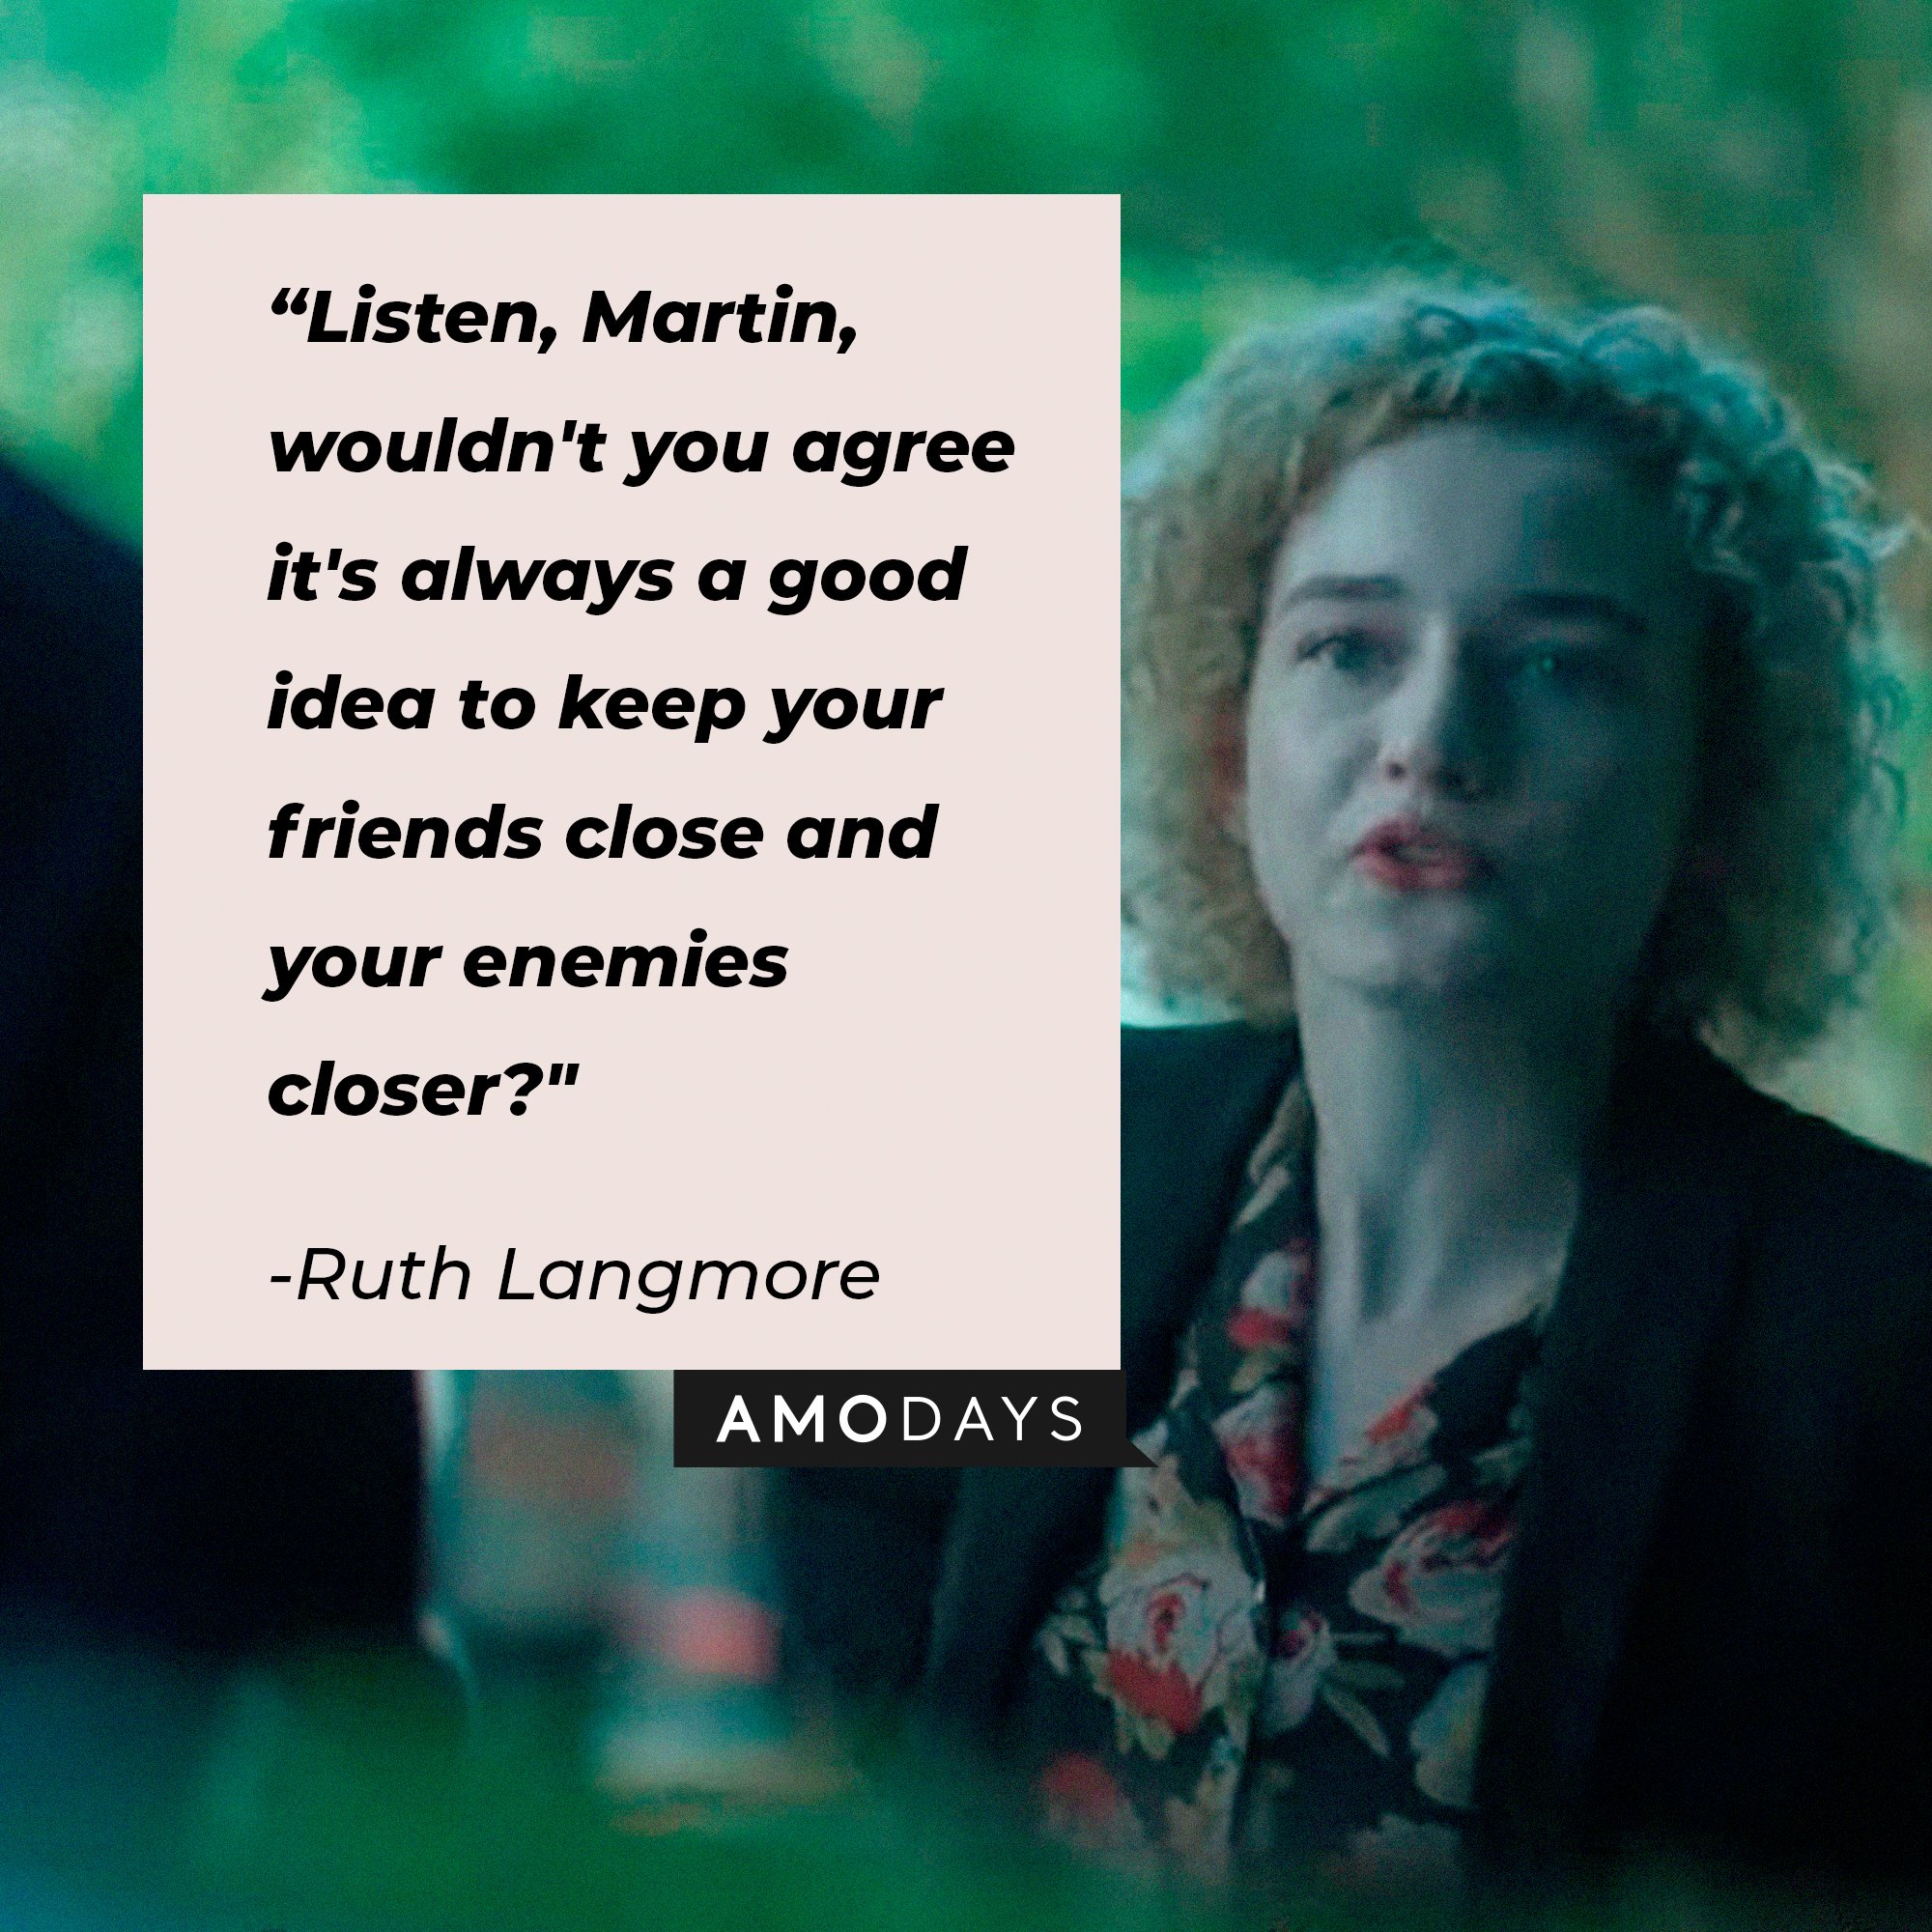 Ruth Langmore’s quote: “Listen, Martin, wouldn't you agree it's always a good idea to keep your friends close and your enemies closer?"| Image: AmoDays